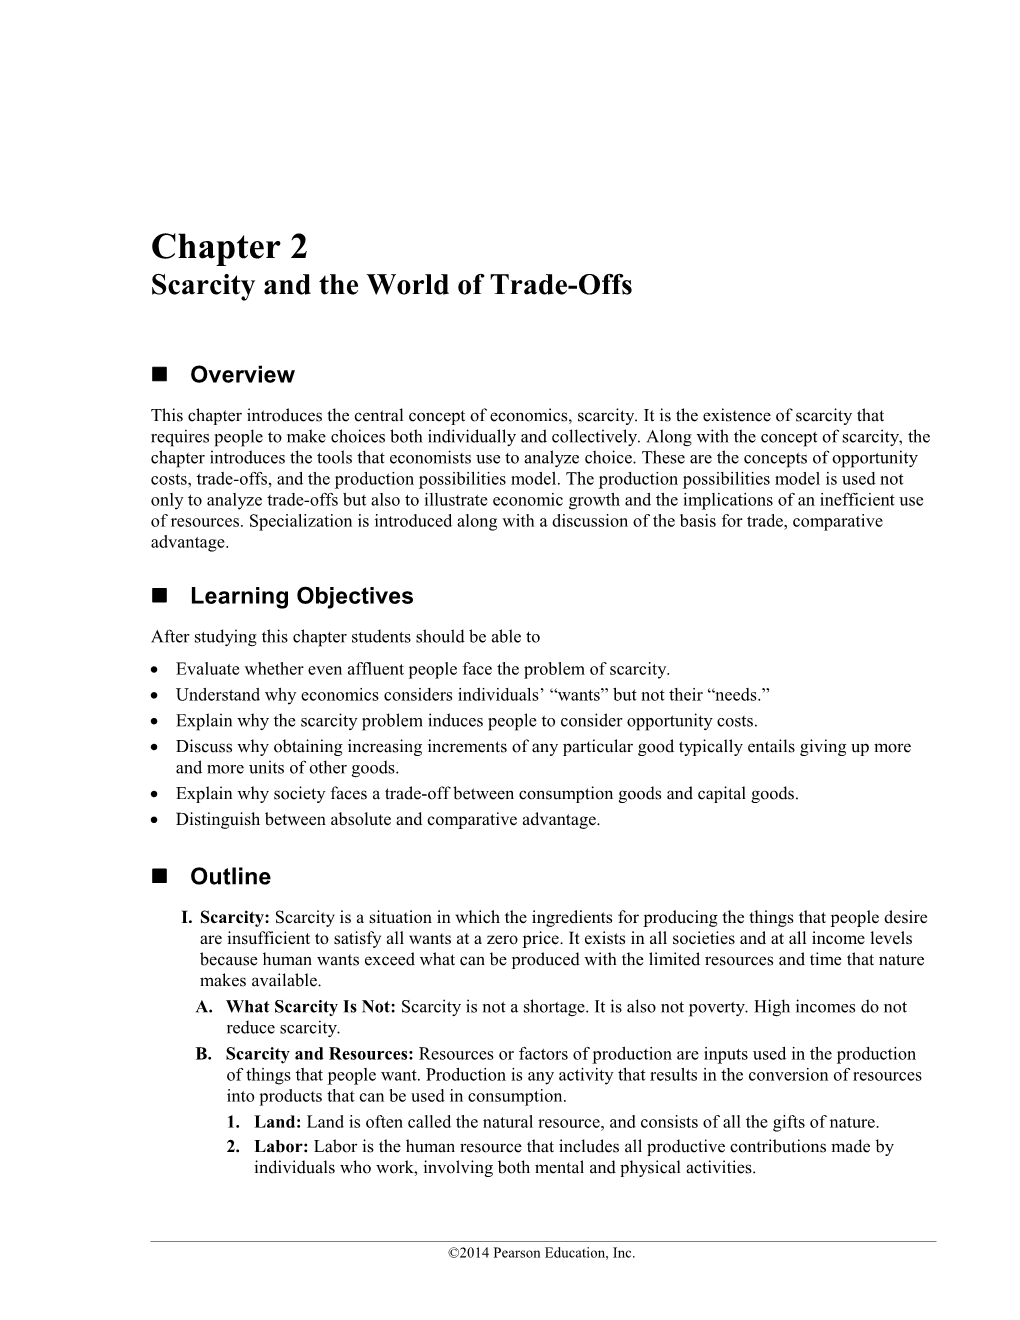 Chapter 2 Scarcity and the World of Trade-Offs